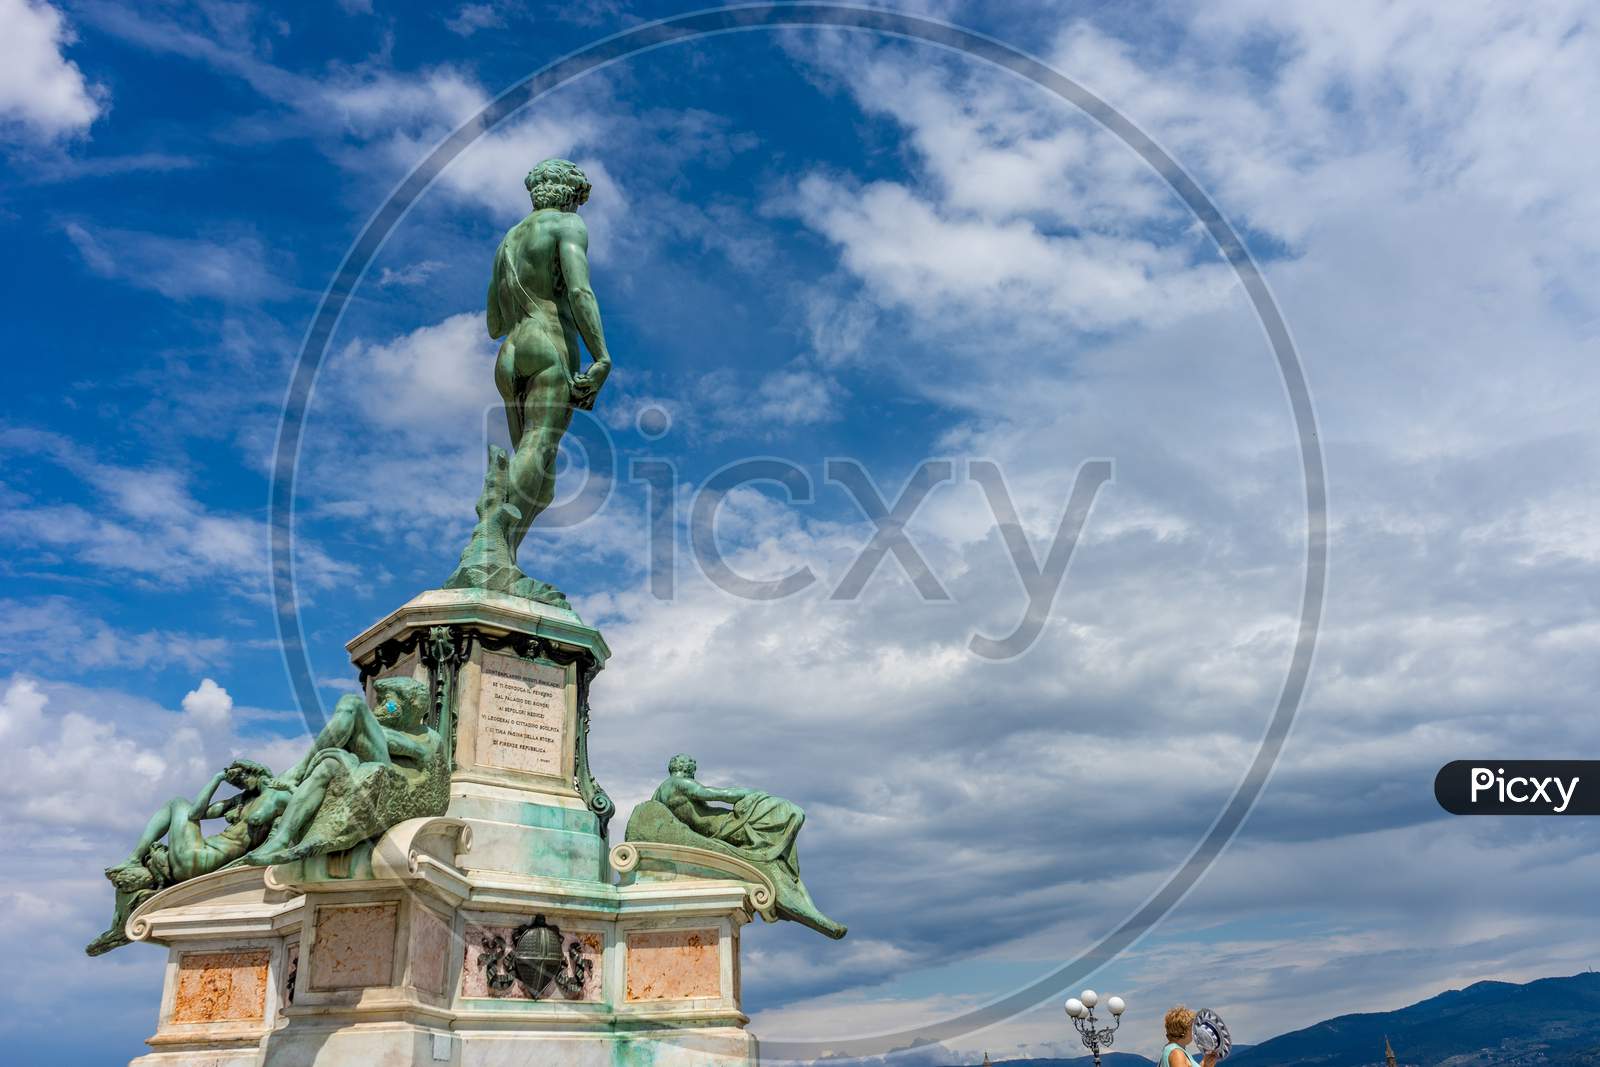 Florence, Italy - 25 June 2018: Toursists At The Statue Of Michelangelo David At Piazzale Michelangelo (Michelangelo Square) In Florence, Italy